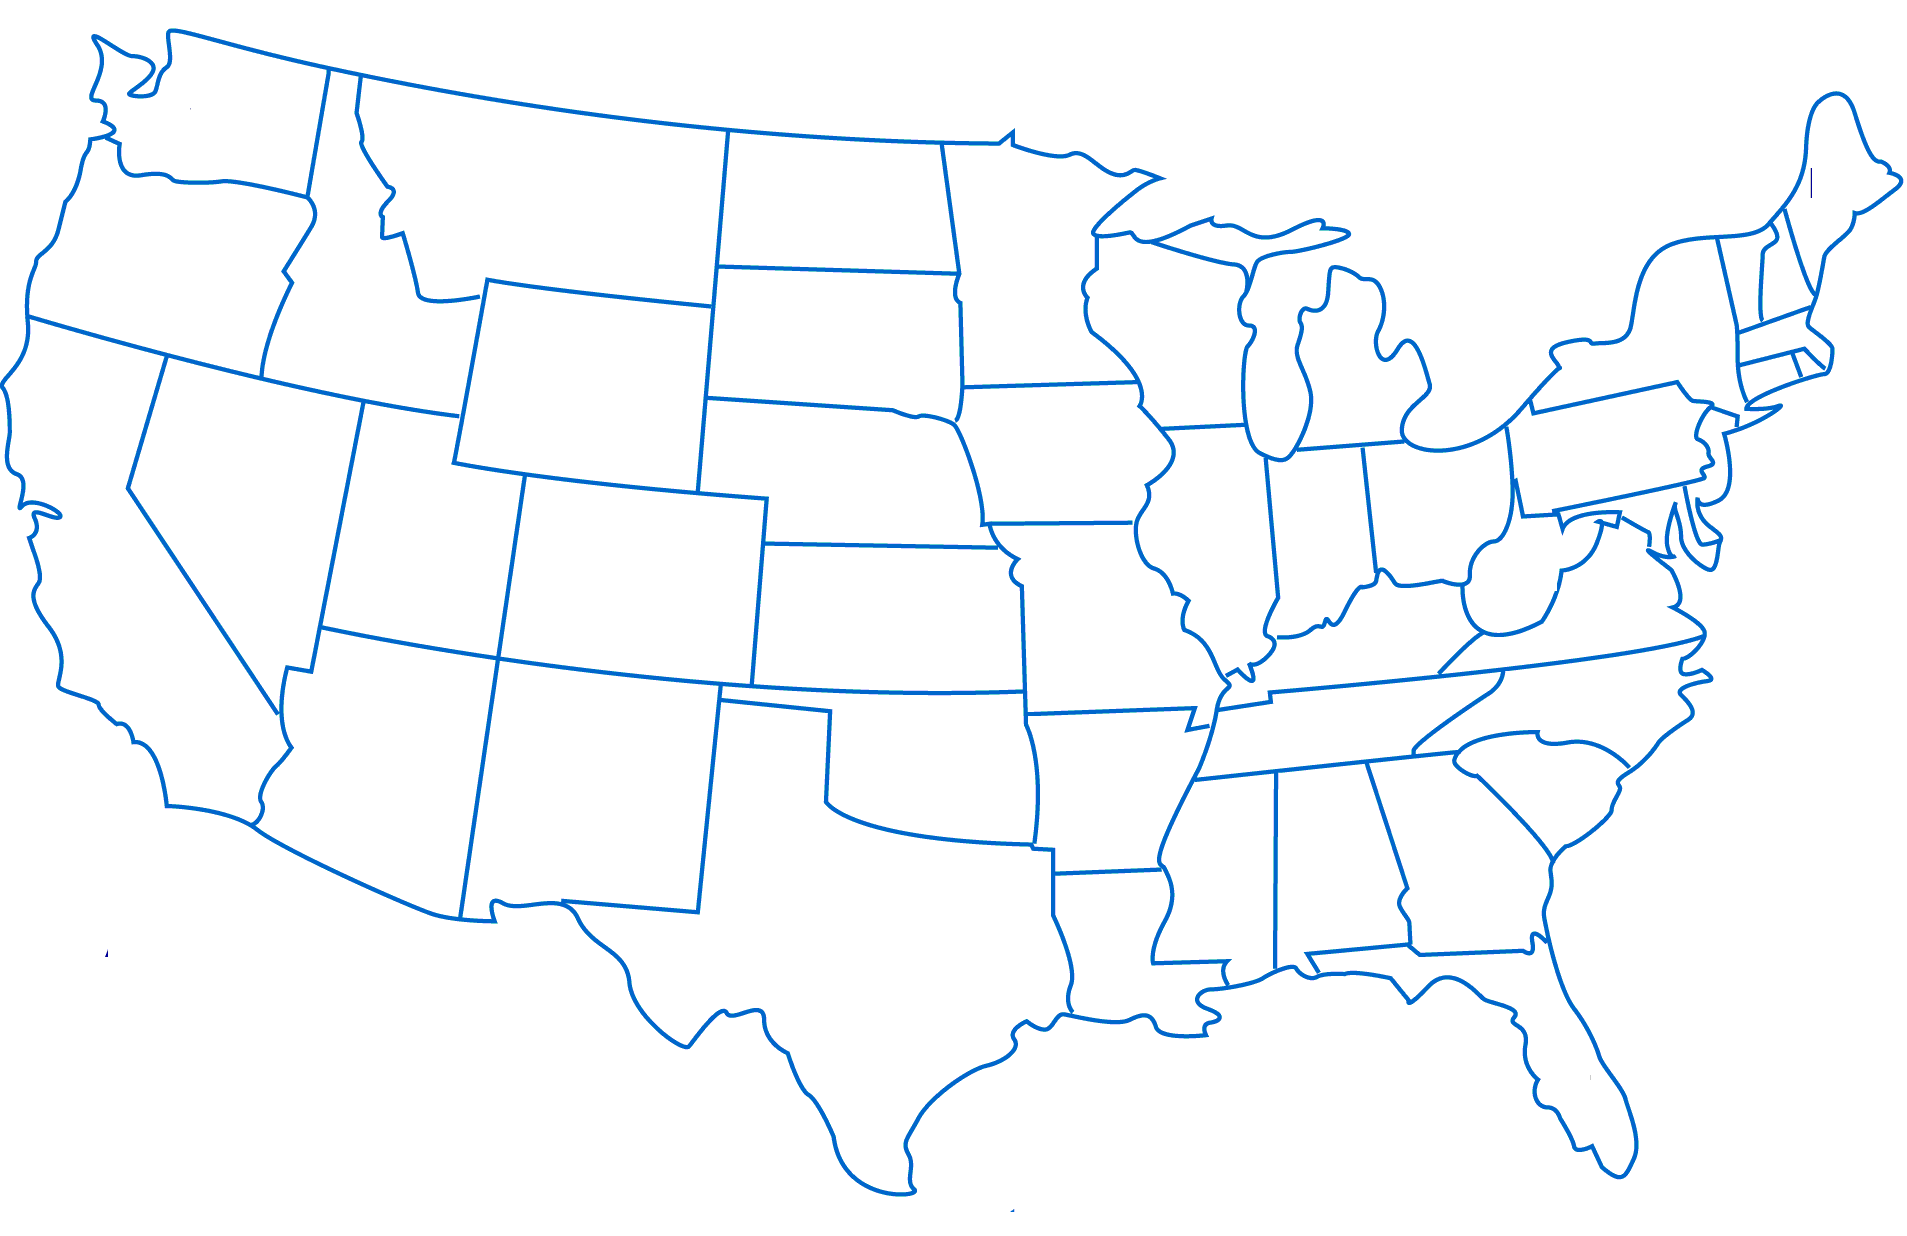 Outline Map Of The United States Of America - ClipArt Best